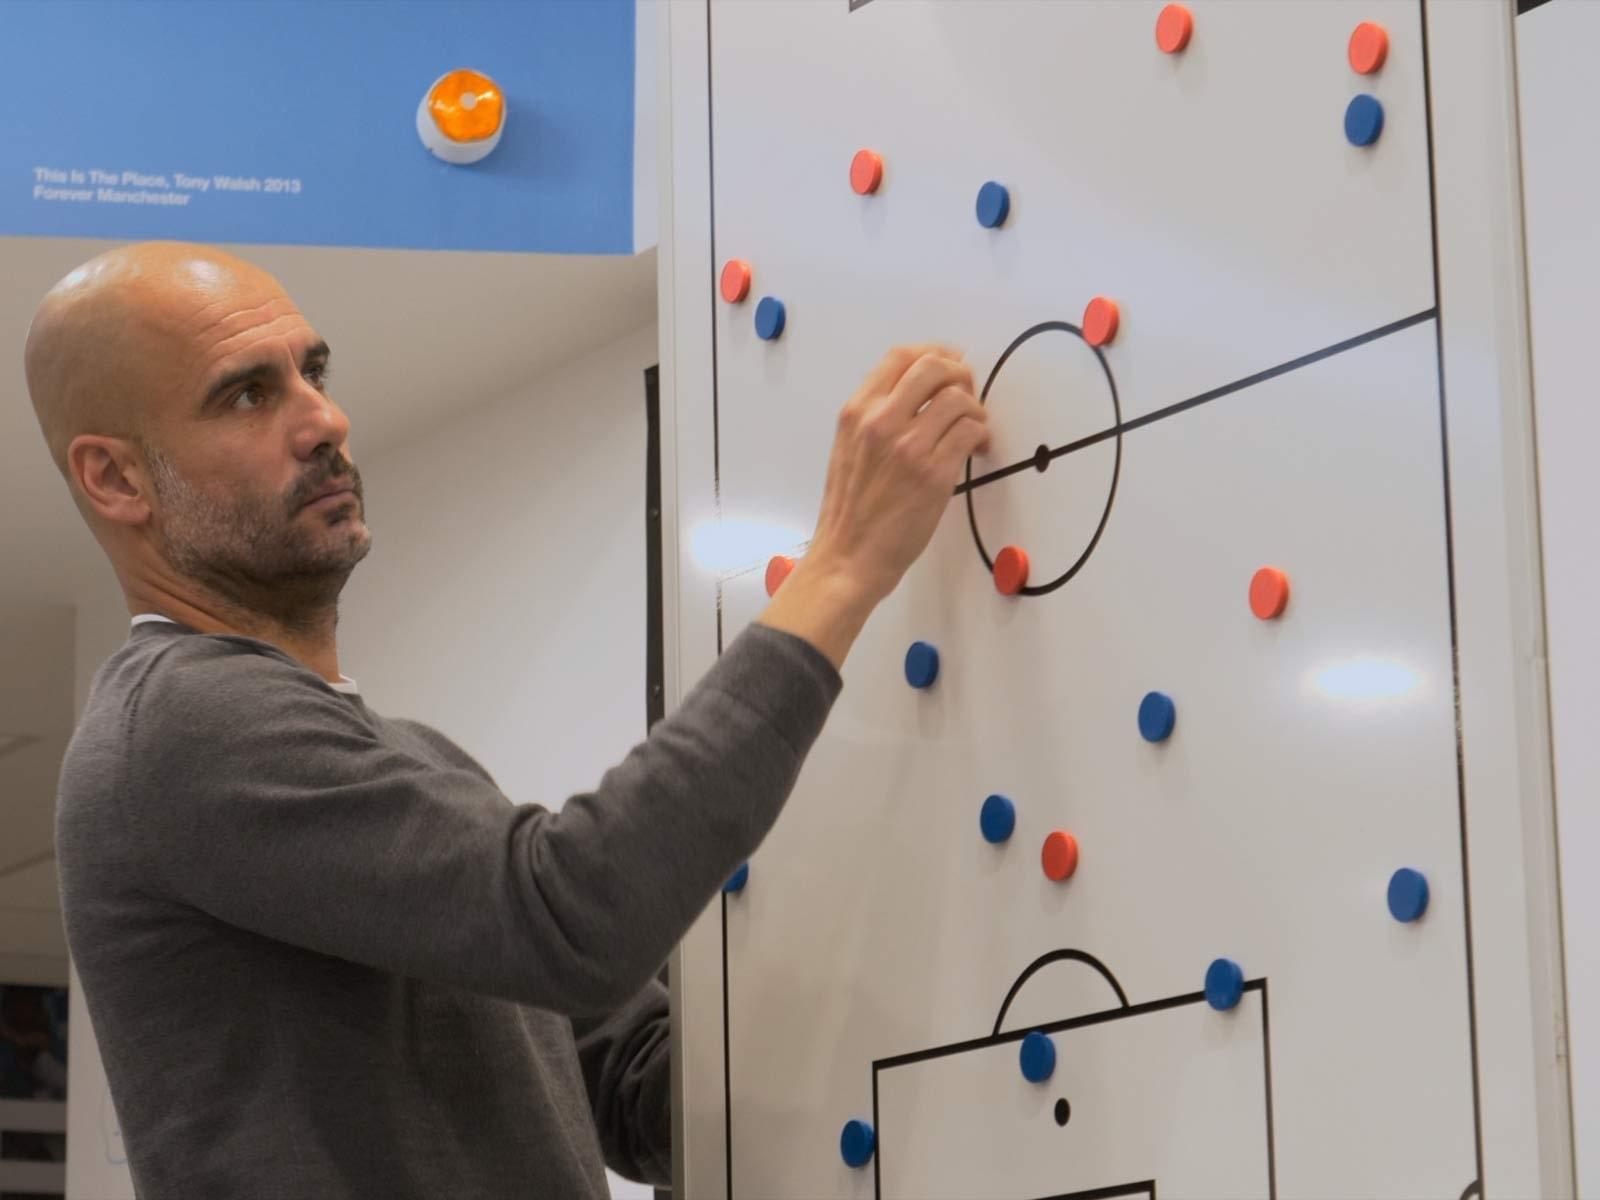 Pep Guardiola explaining tactical concepts about offensive transitions to his players.